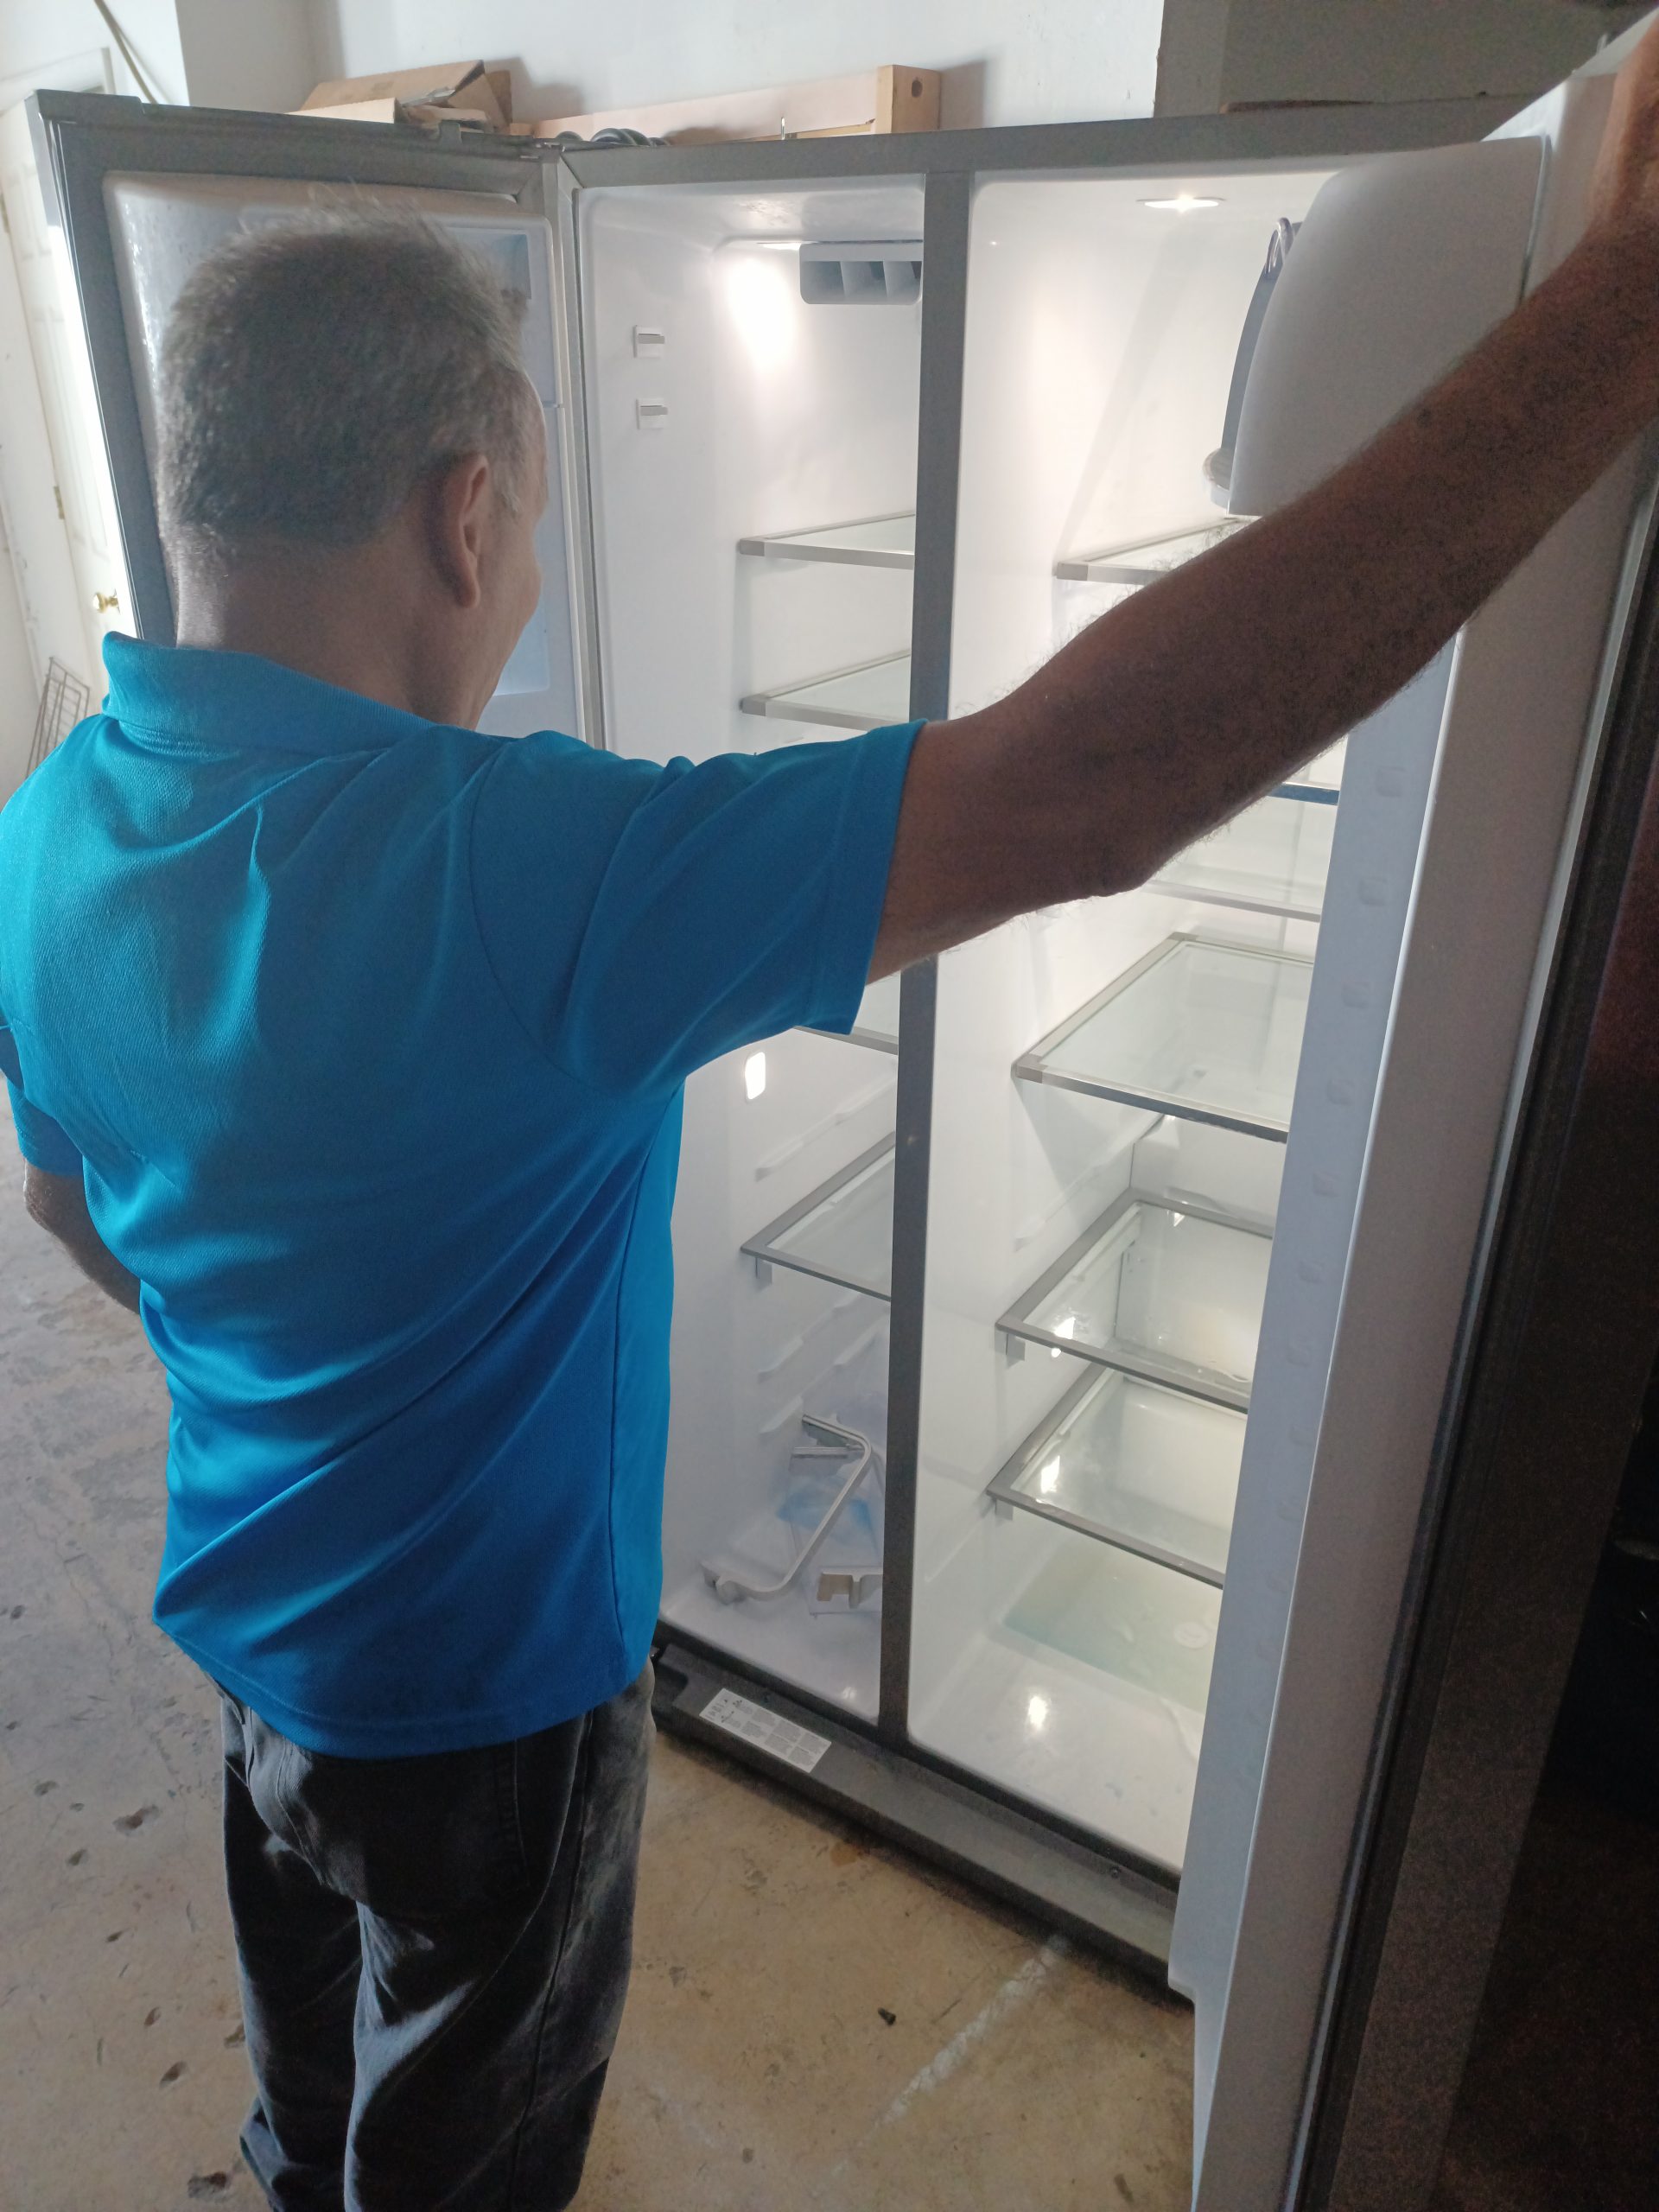 Refrigerator Repair Service In Fort Myers FL